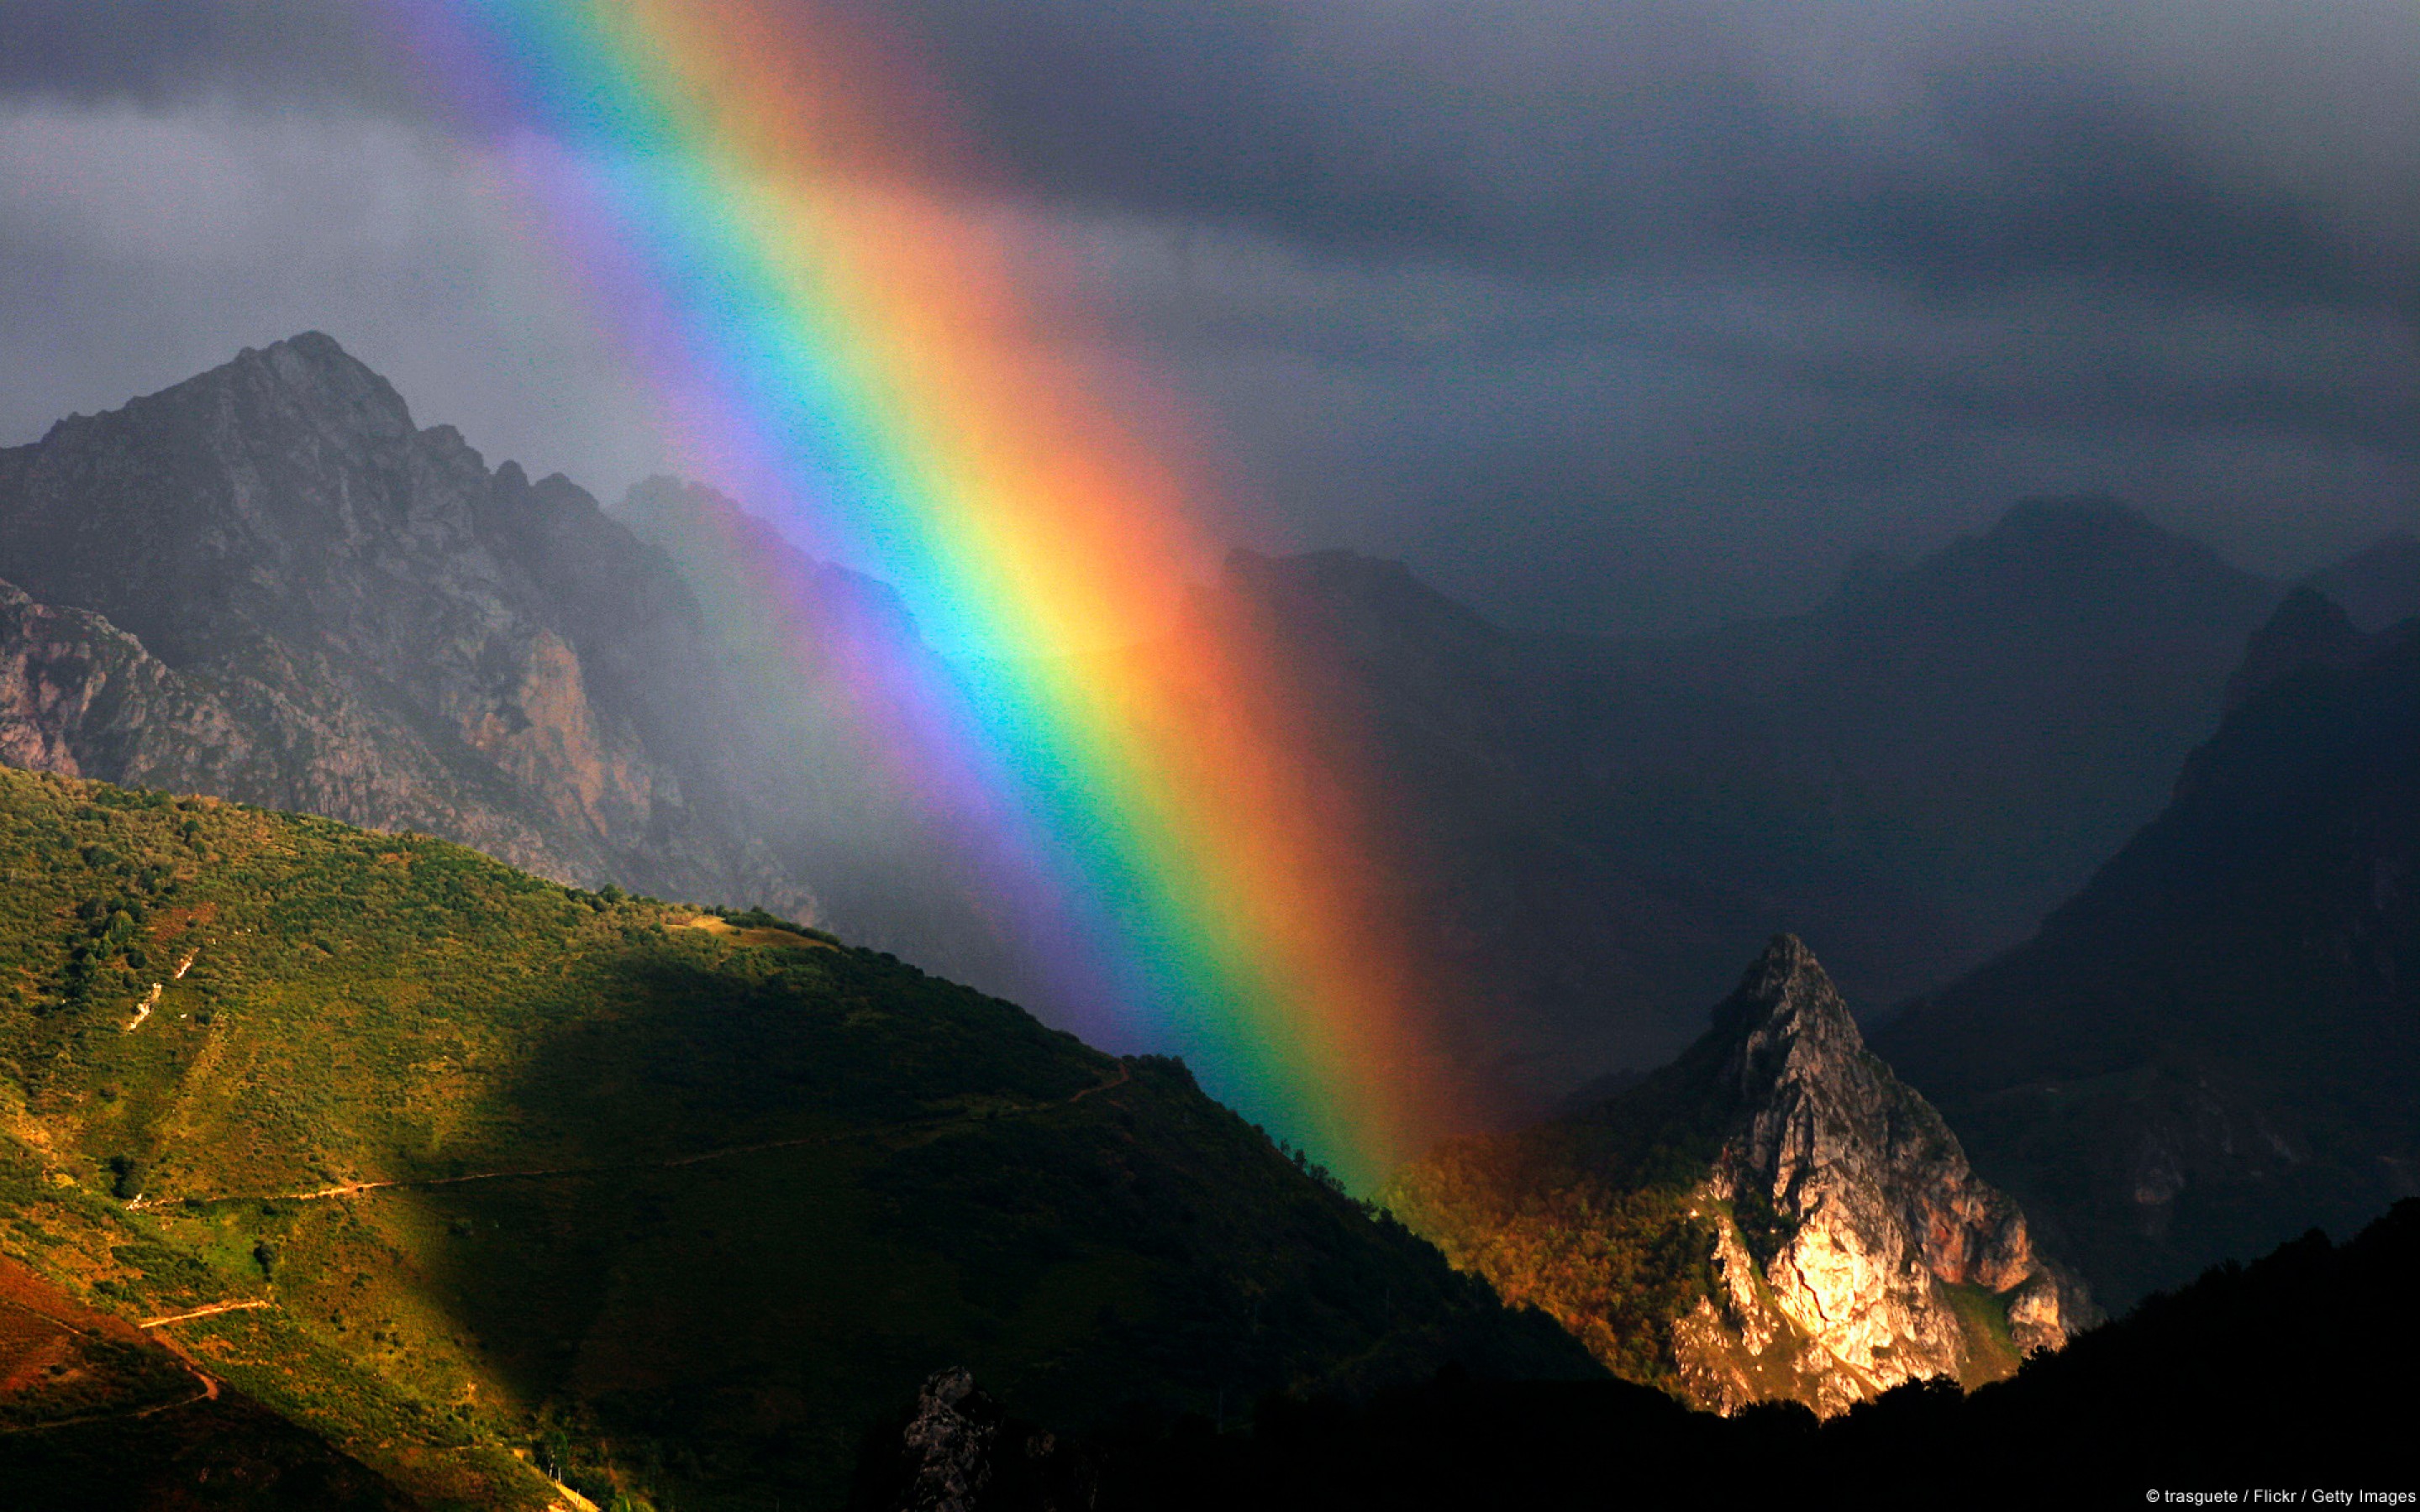  Rainbow  Scenery wallpaper  nature and landscape 